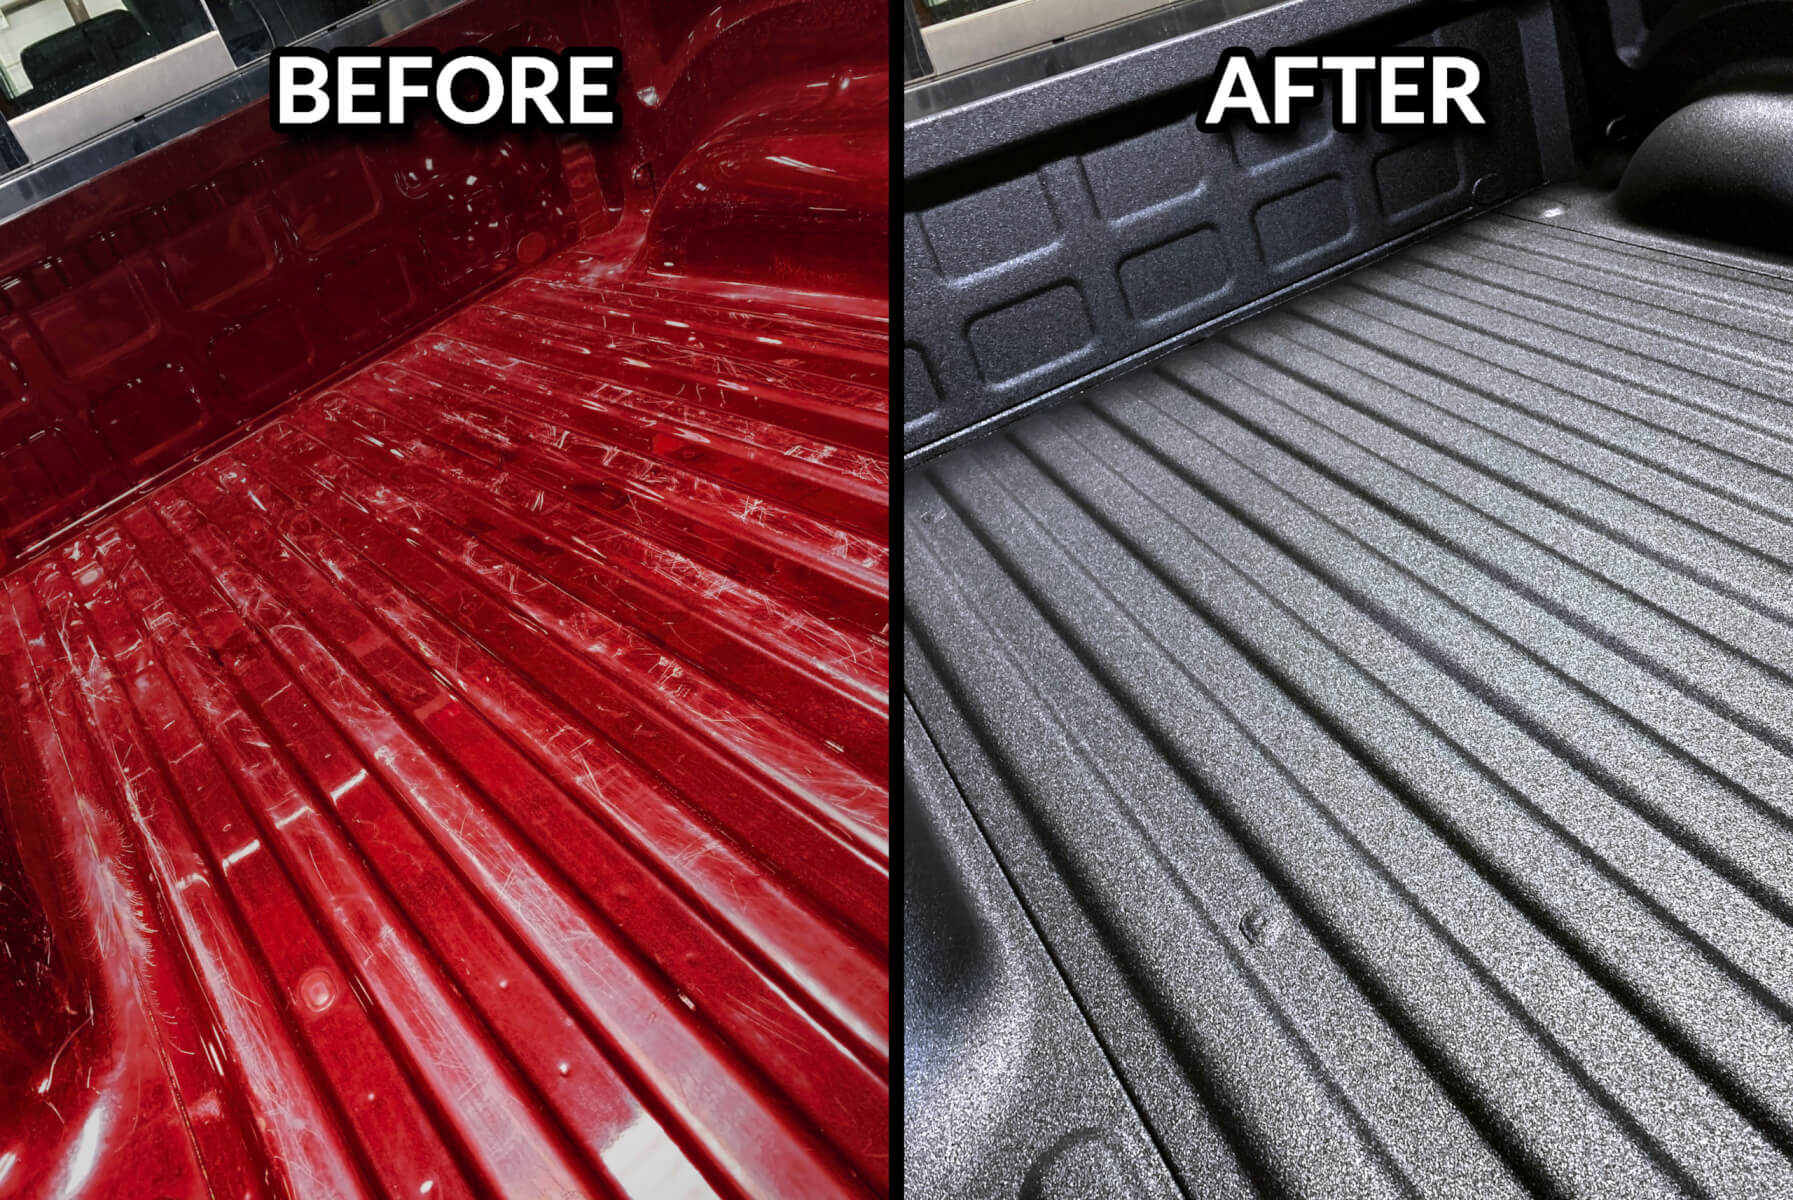 https://tntcustoms.com/wp-content/uploads/2022/02/Bed-Liner-Before-and-After.jpg